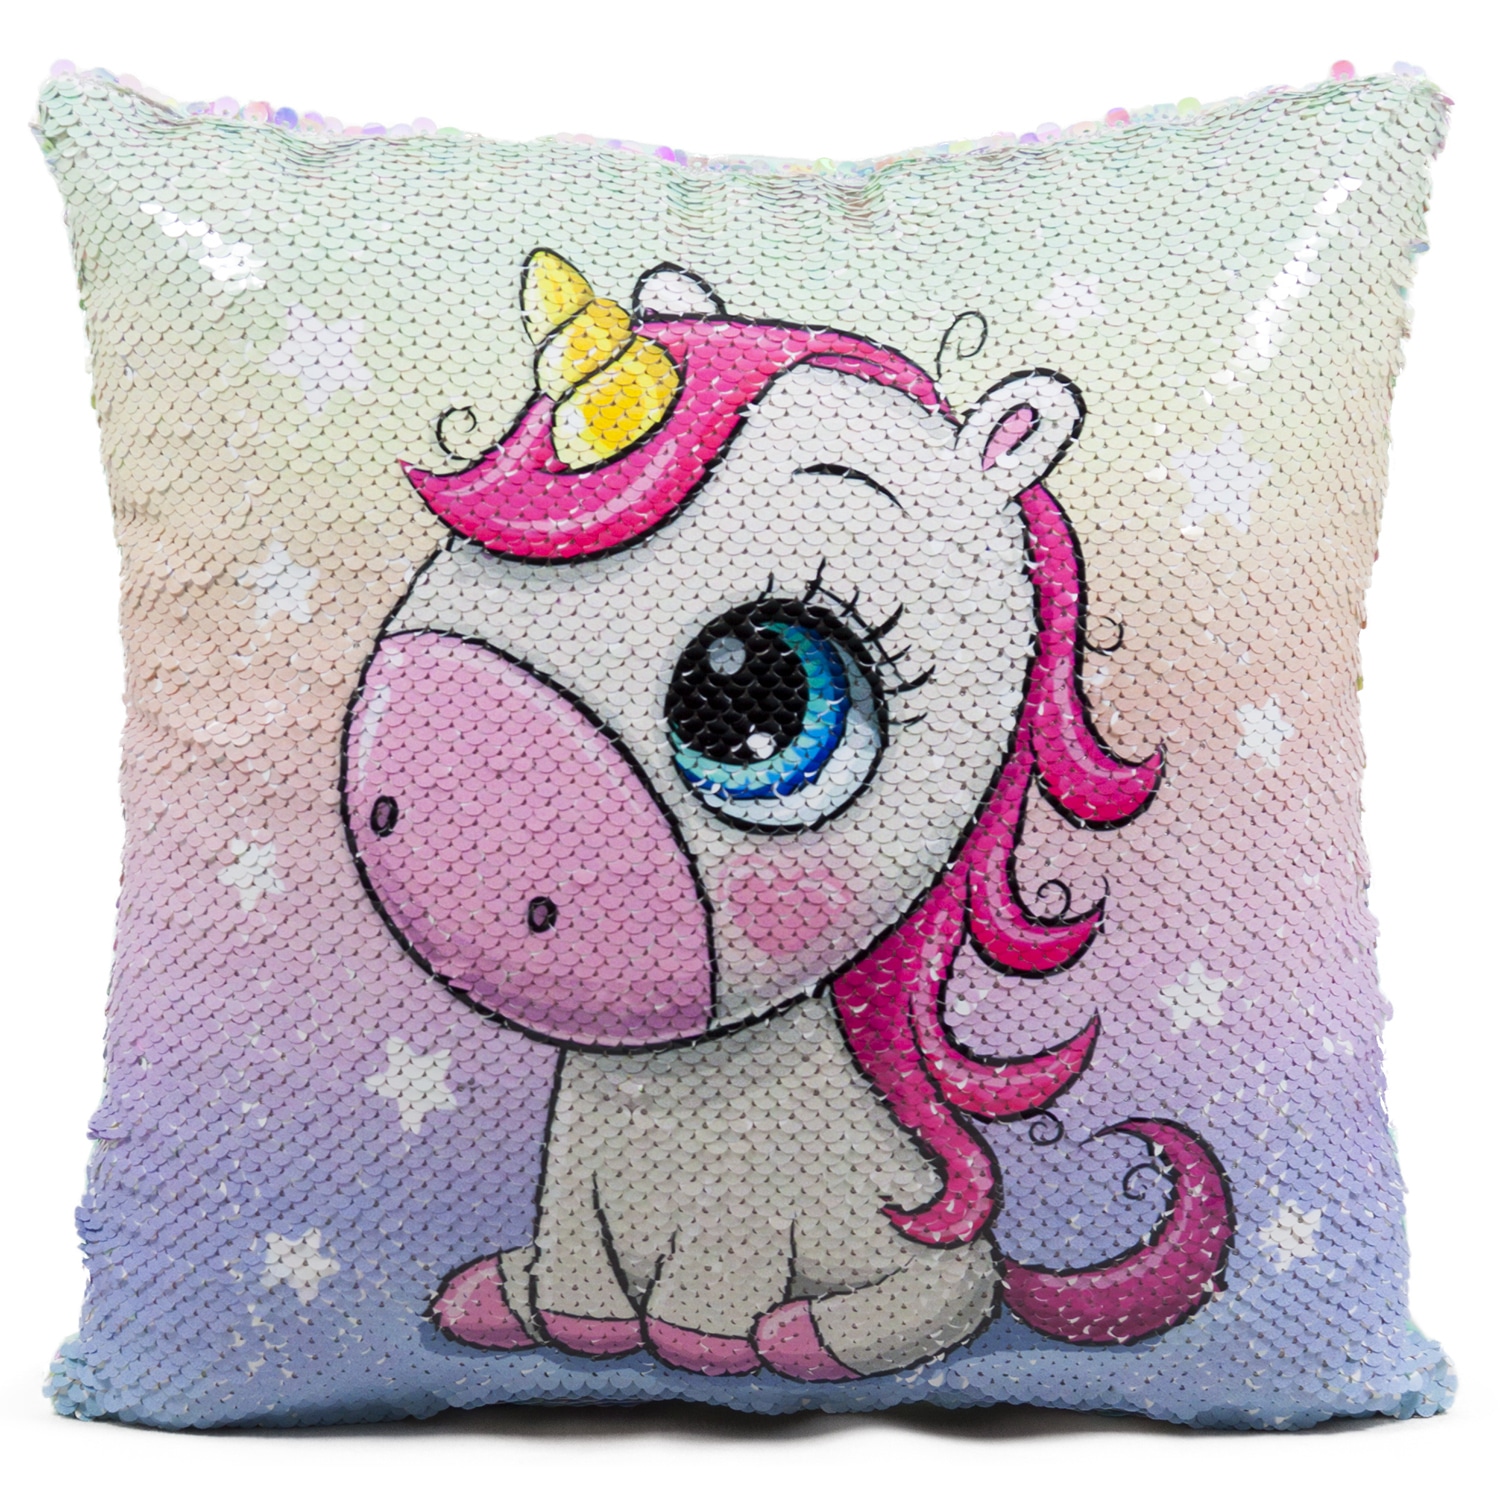 Pillow with unicorn and sequins